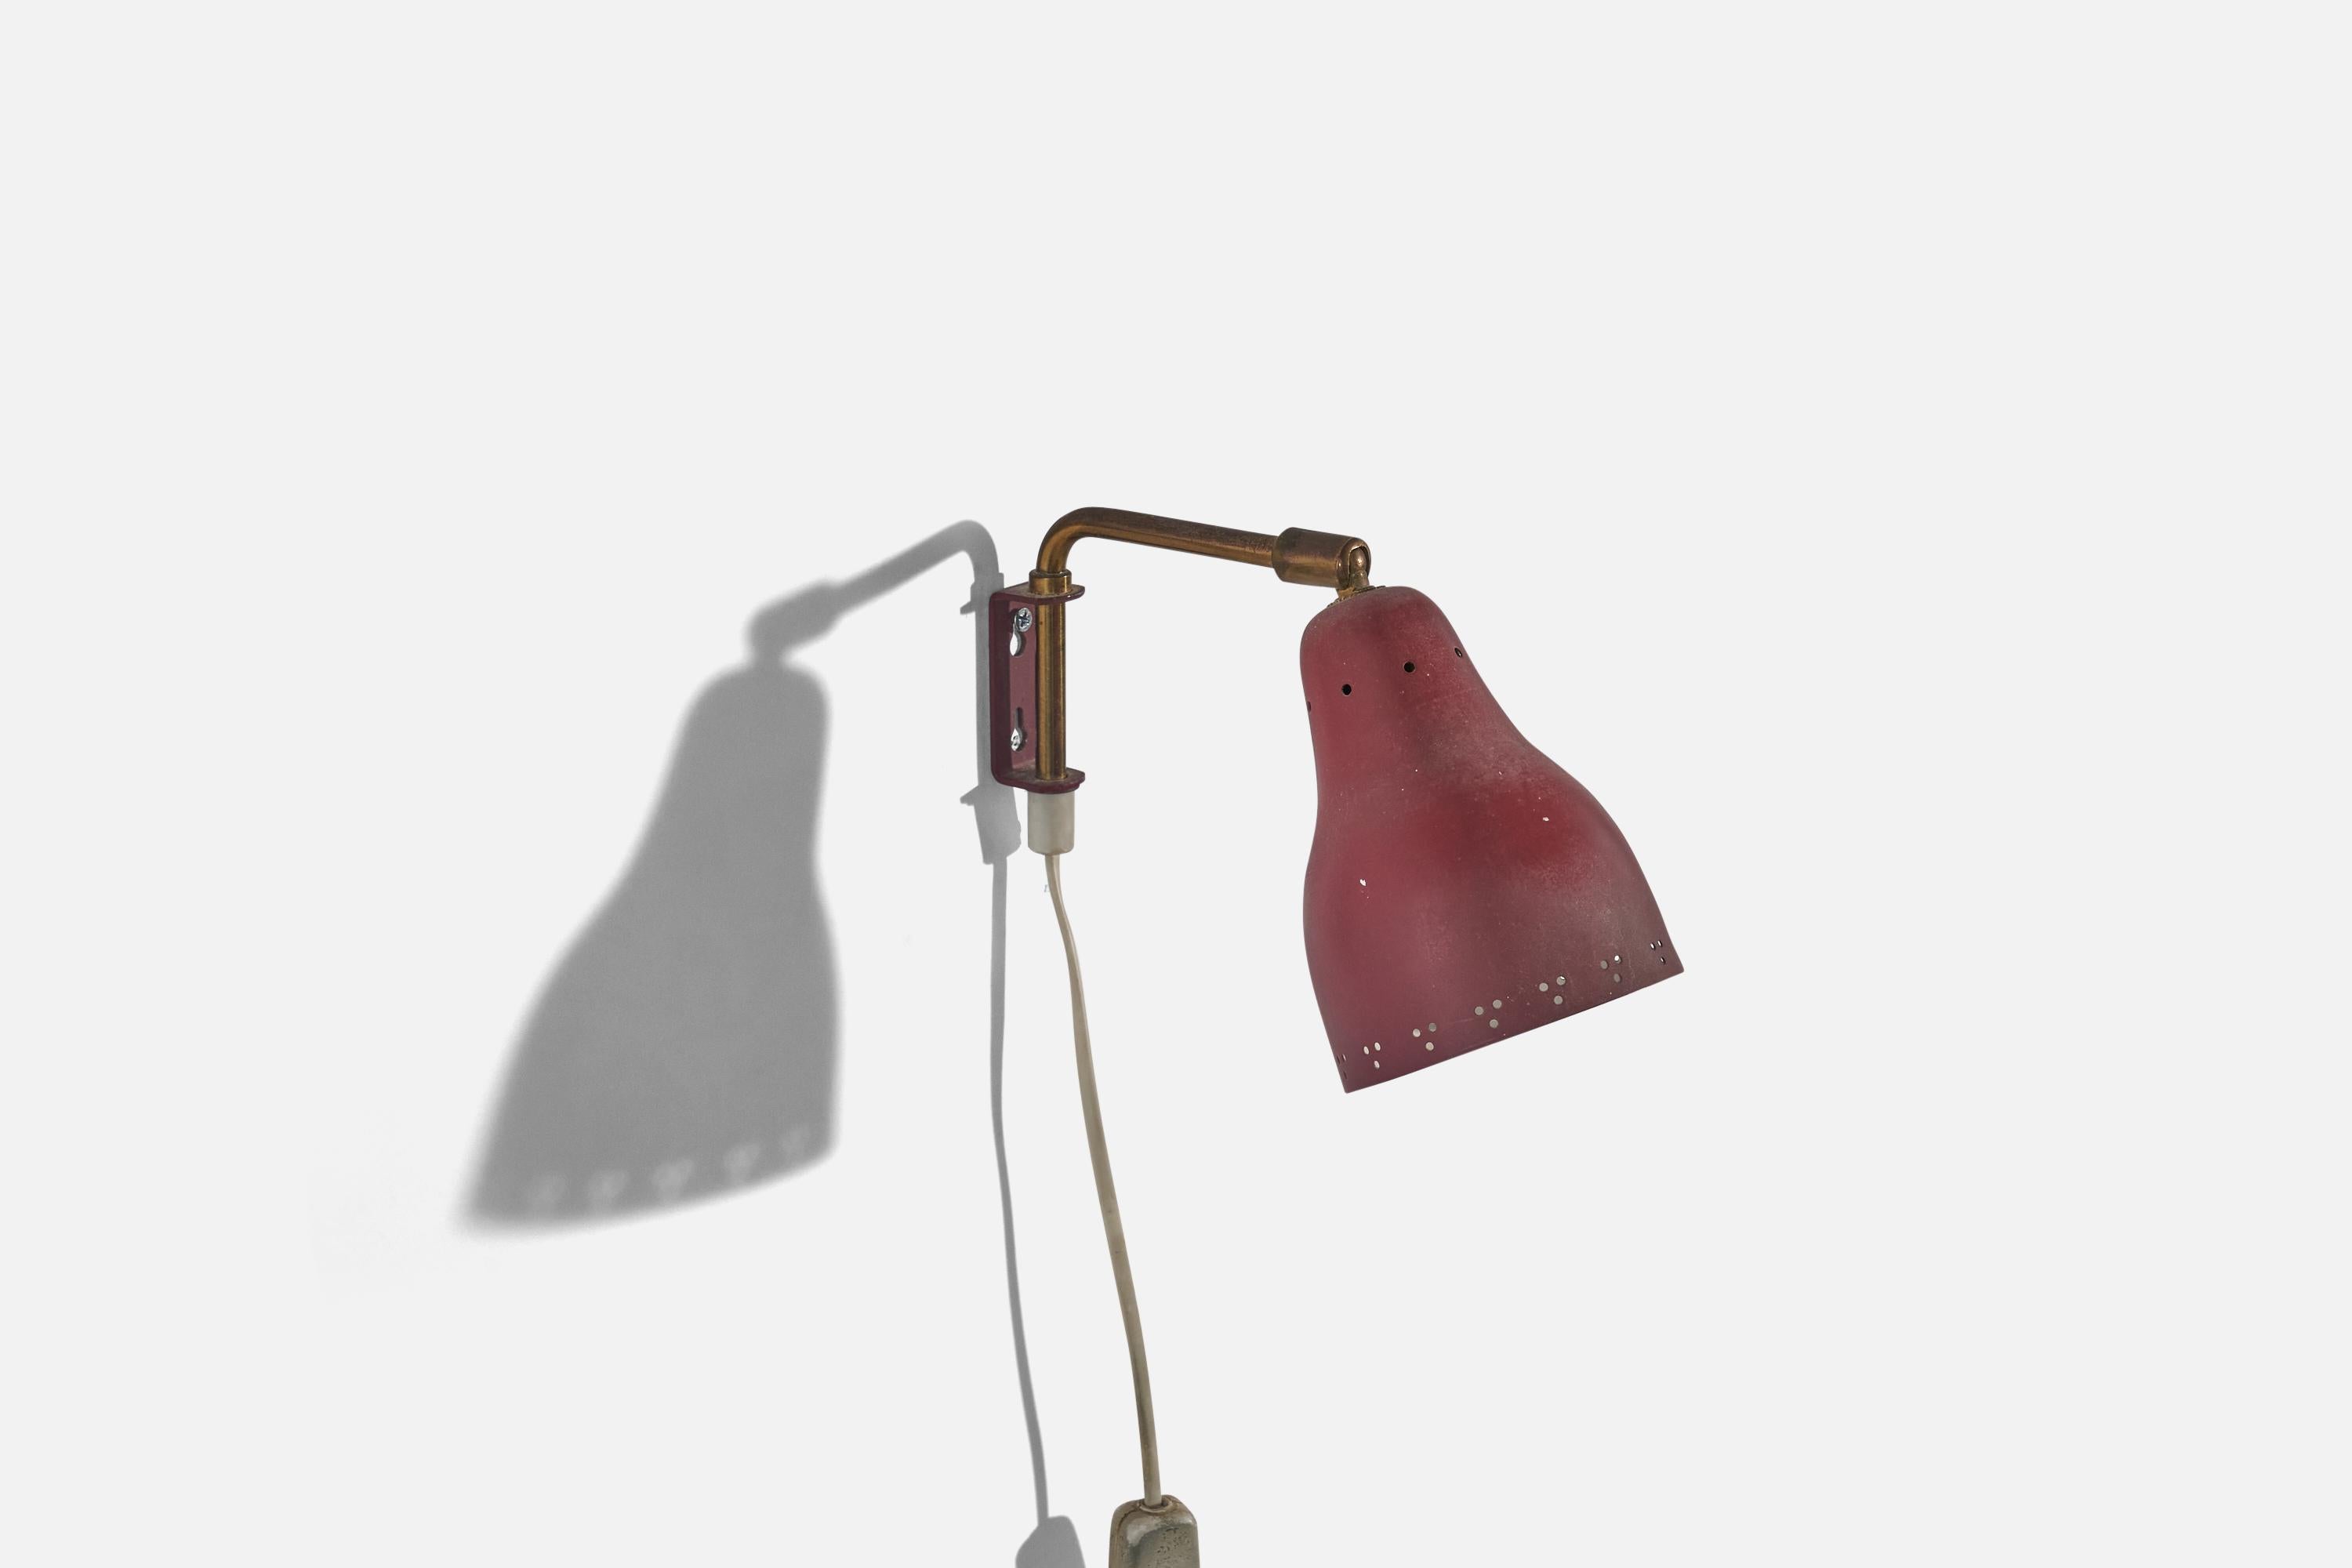 A brass and red lacquered metal wall light designed and produced in Sweden, c. 1950s.

Dimensions of back plate (inches) : 2.3125 x .8125 x .0625 (H x W x D).